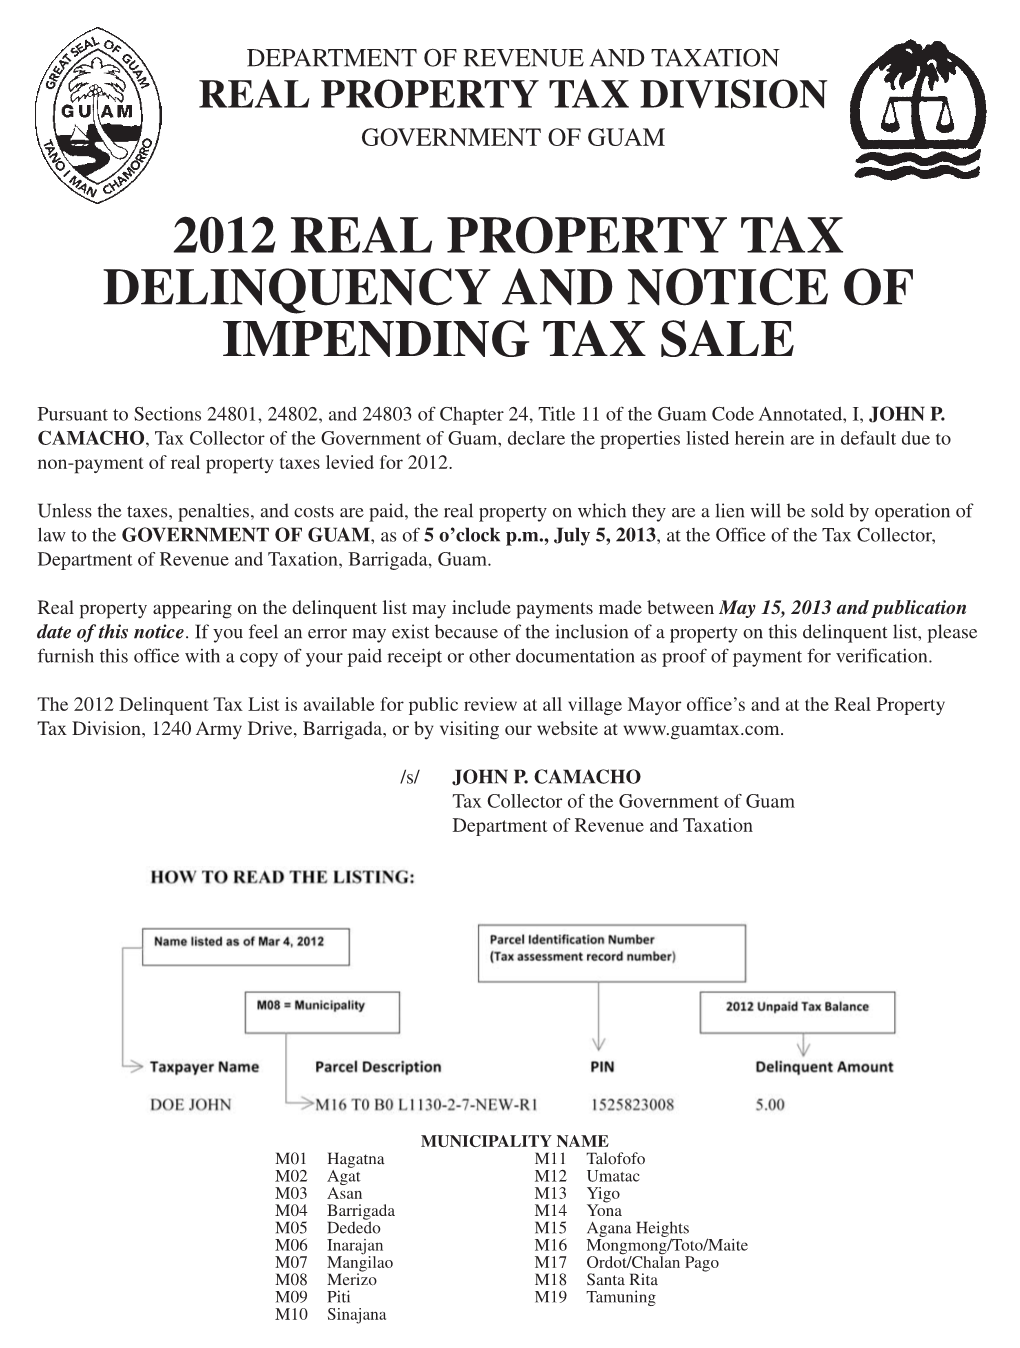 2012 Real Property Tax Delinquency and Notice of Impending Tax Sale